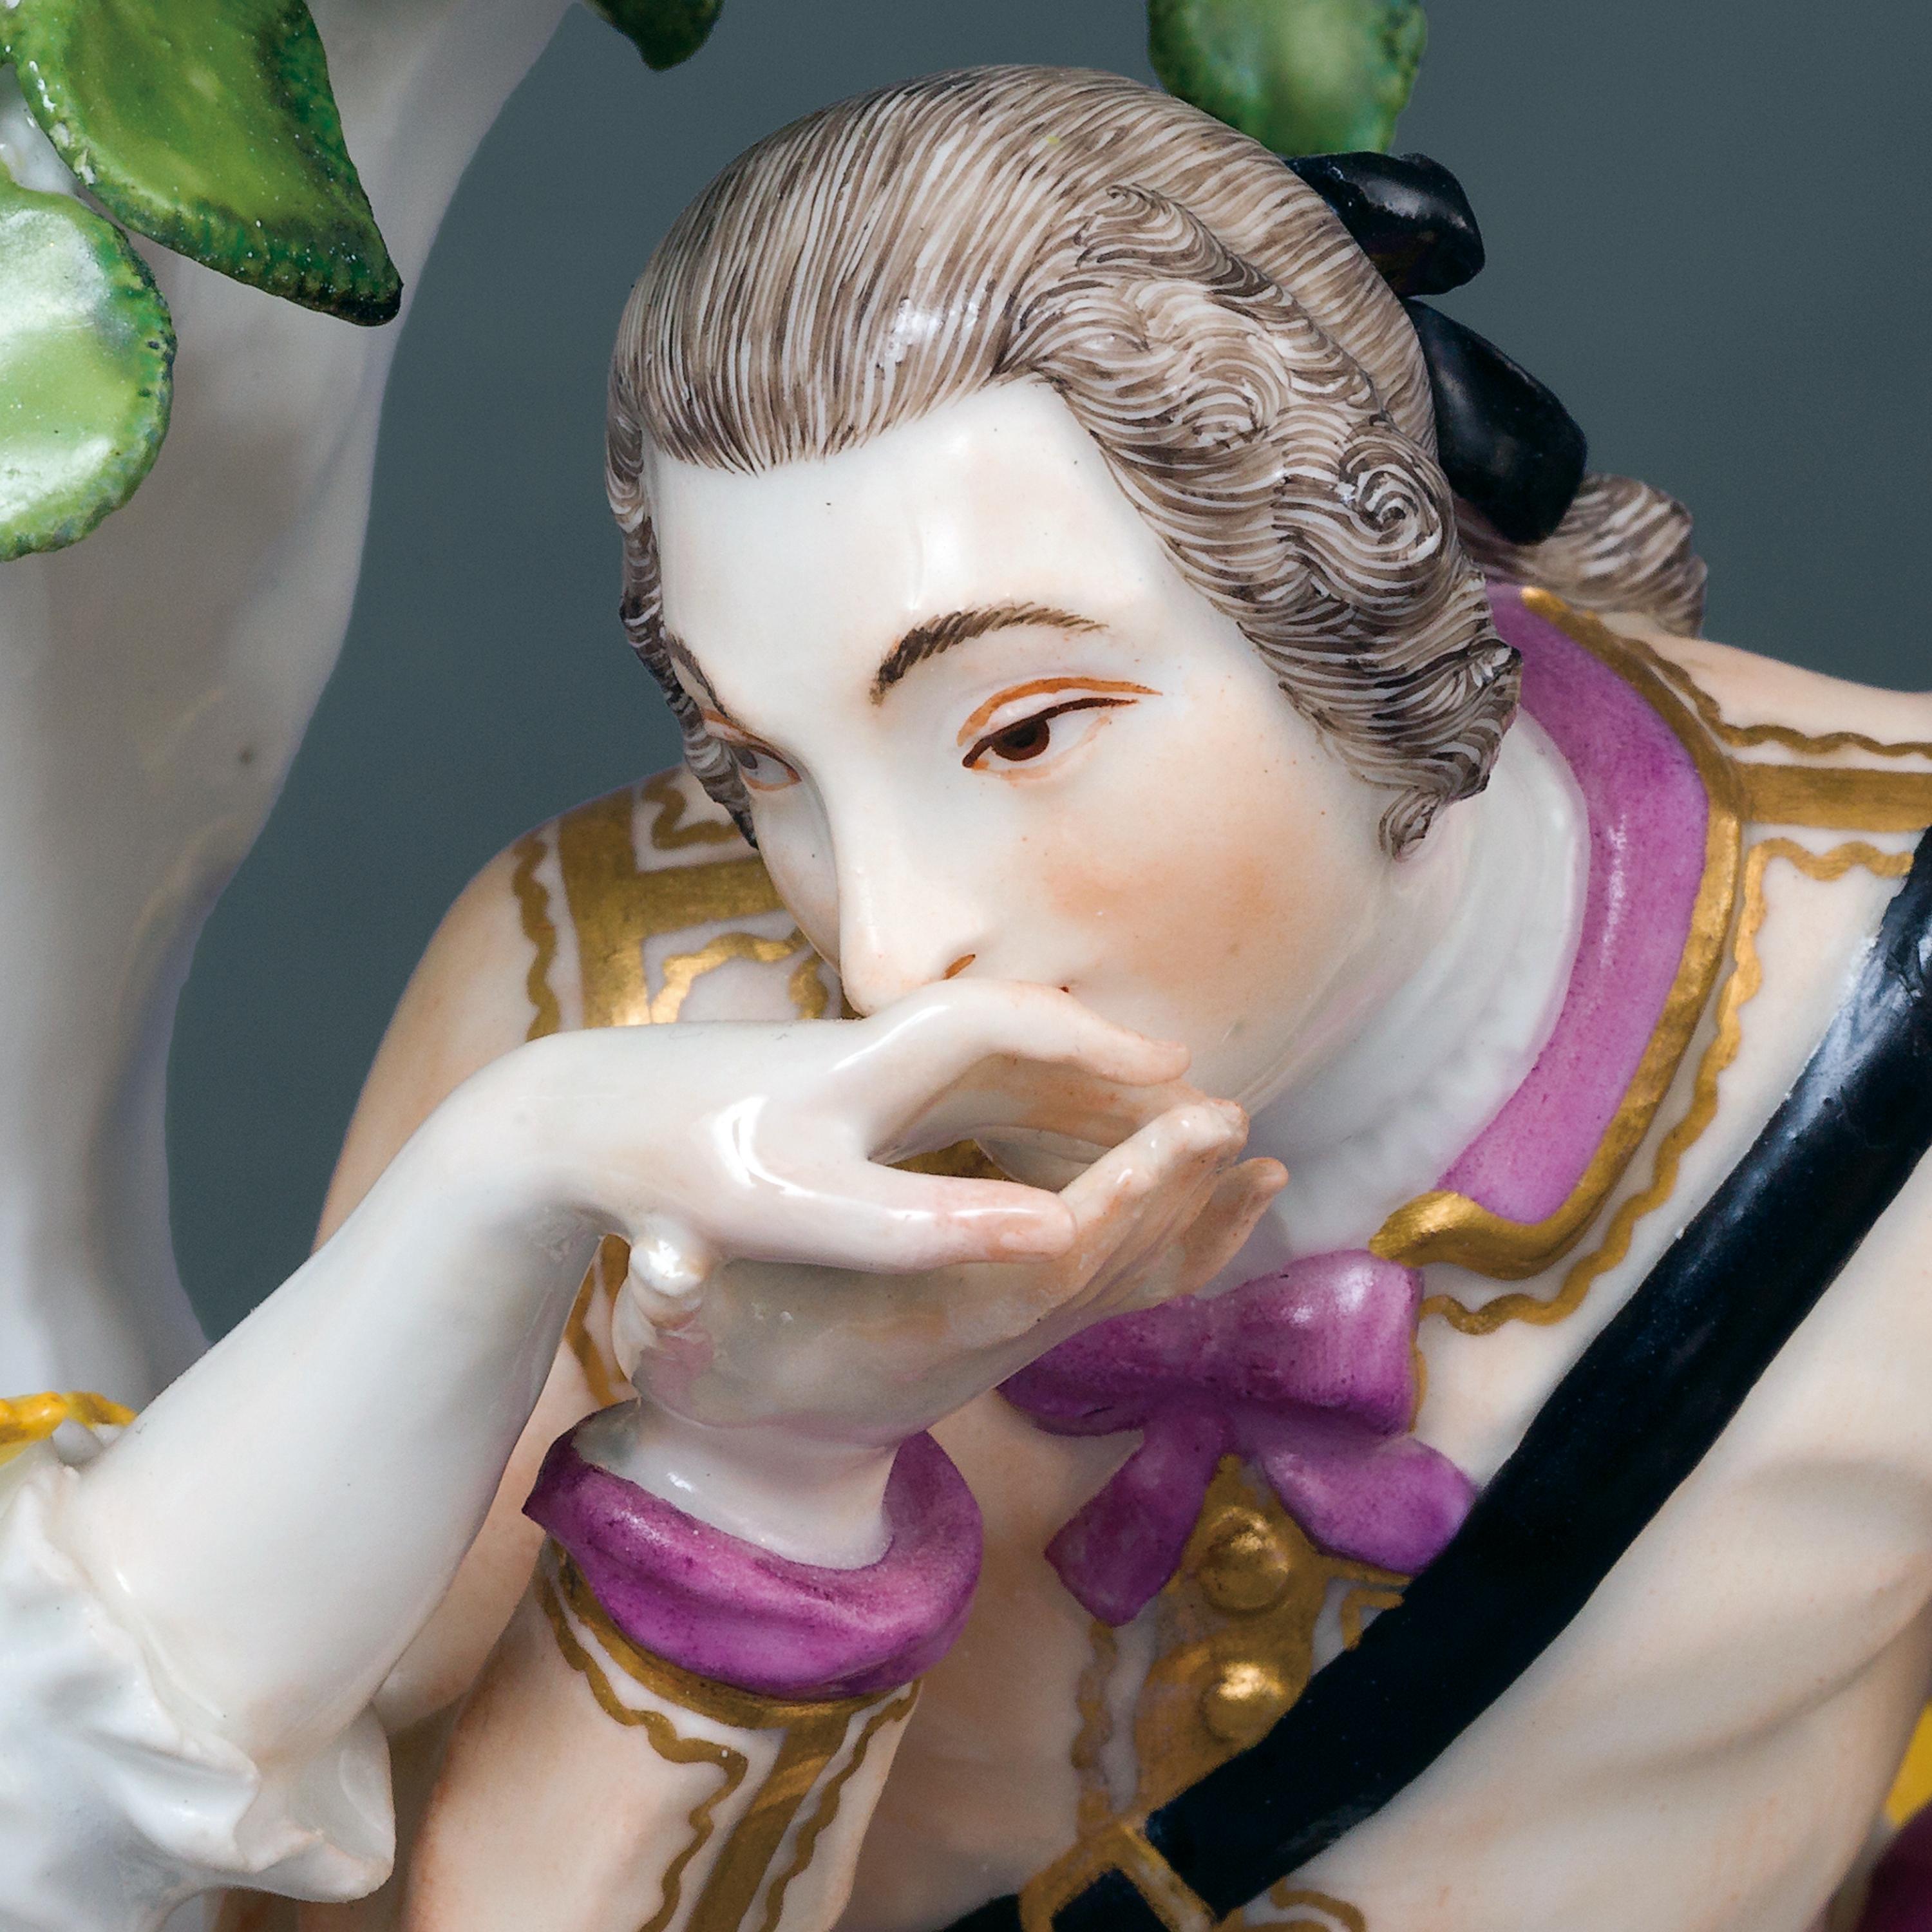 Meissen, hard-paste porcelain, circa 1738-1740.

The Artist
The Meissen manufactory near the city of Dresden was founded by Augustus II (1670-1733), King of Poland and Electoral of Saxony, in 1710. It was the first factory in Europe to succeed in